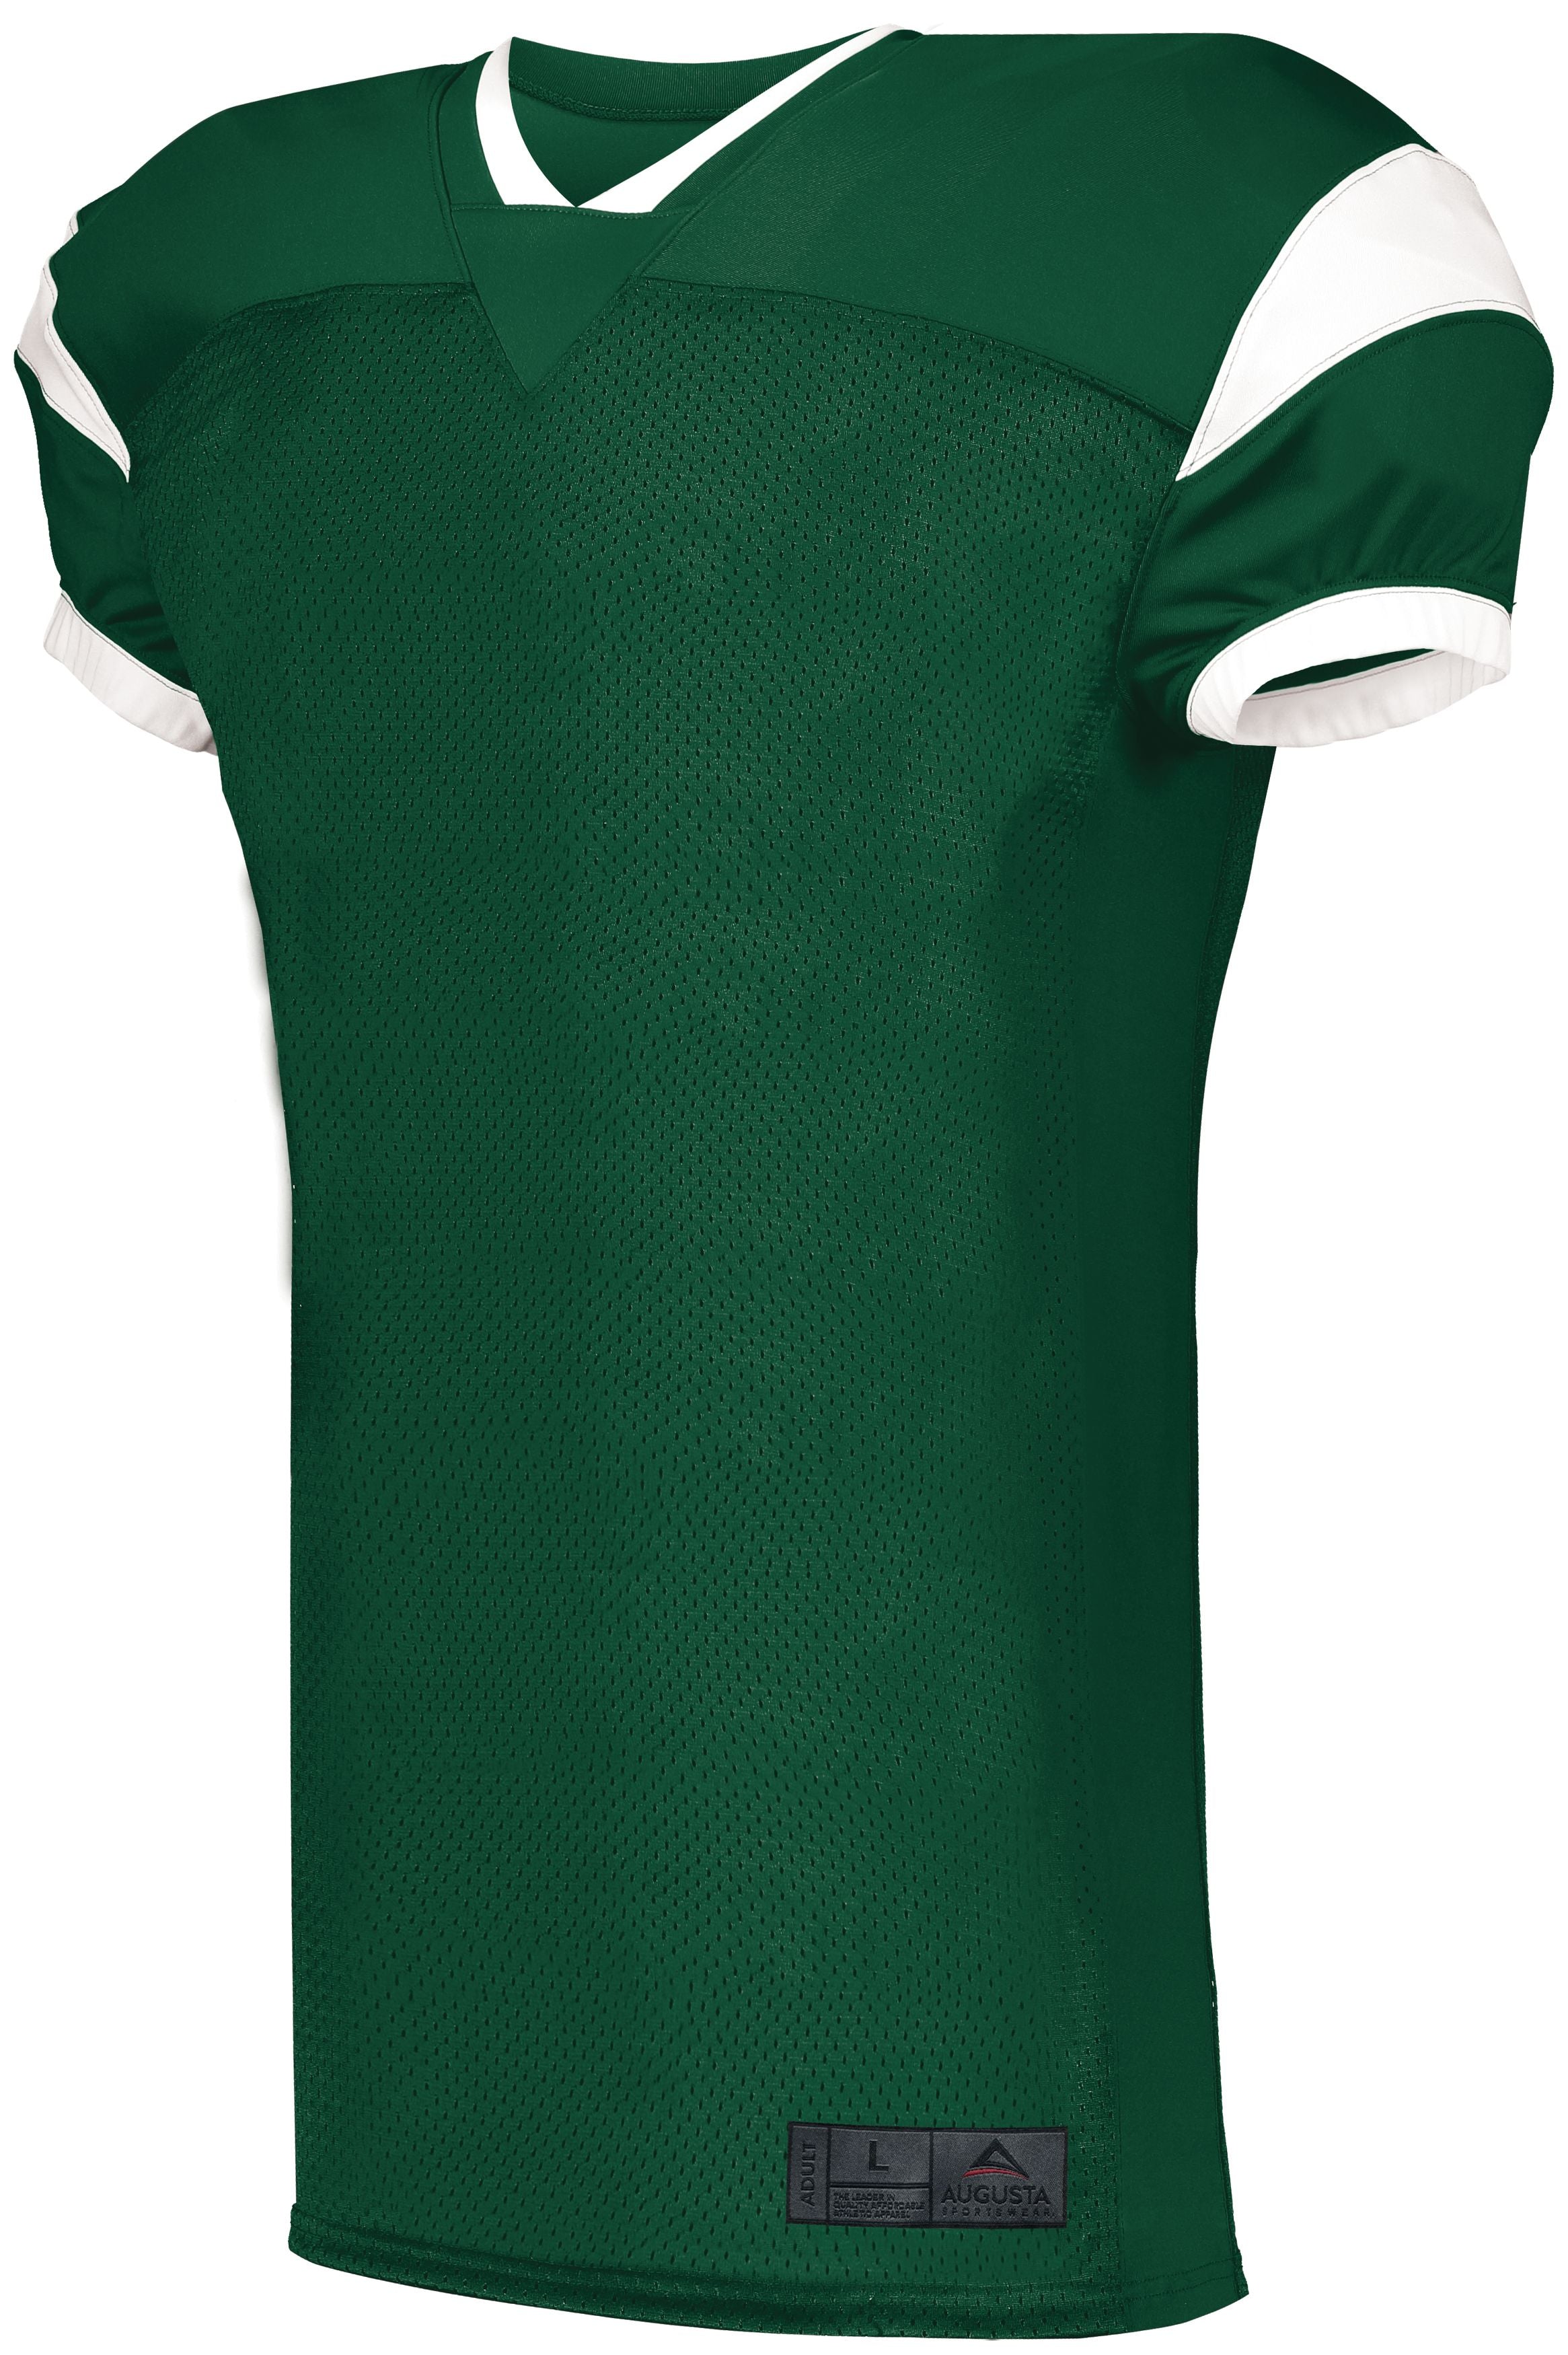 Augusta Sportswear Slant Football Jersey in Dark Green/White  -Part of the Adult, Adult-Jersey, Augusta-Products, Football, Shirts, All-Sports, All-Sports-1 product lines at KanaleyCreations.com